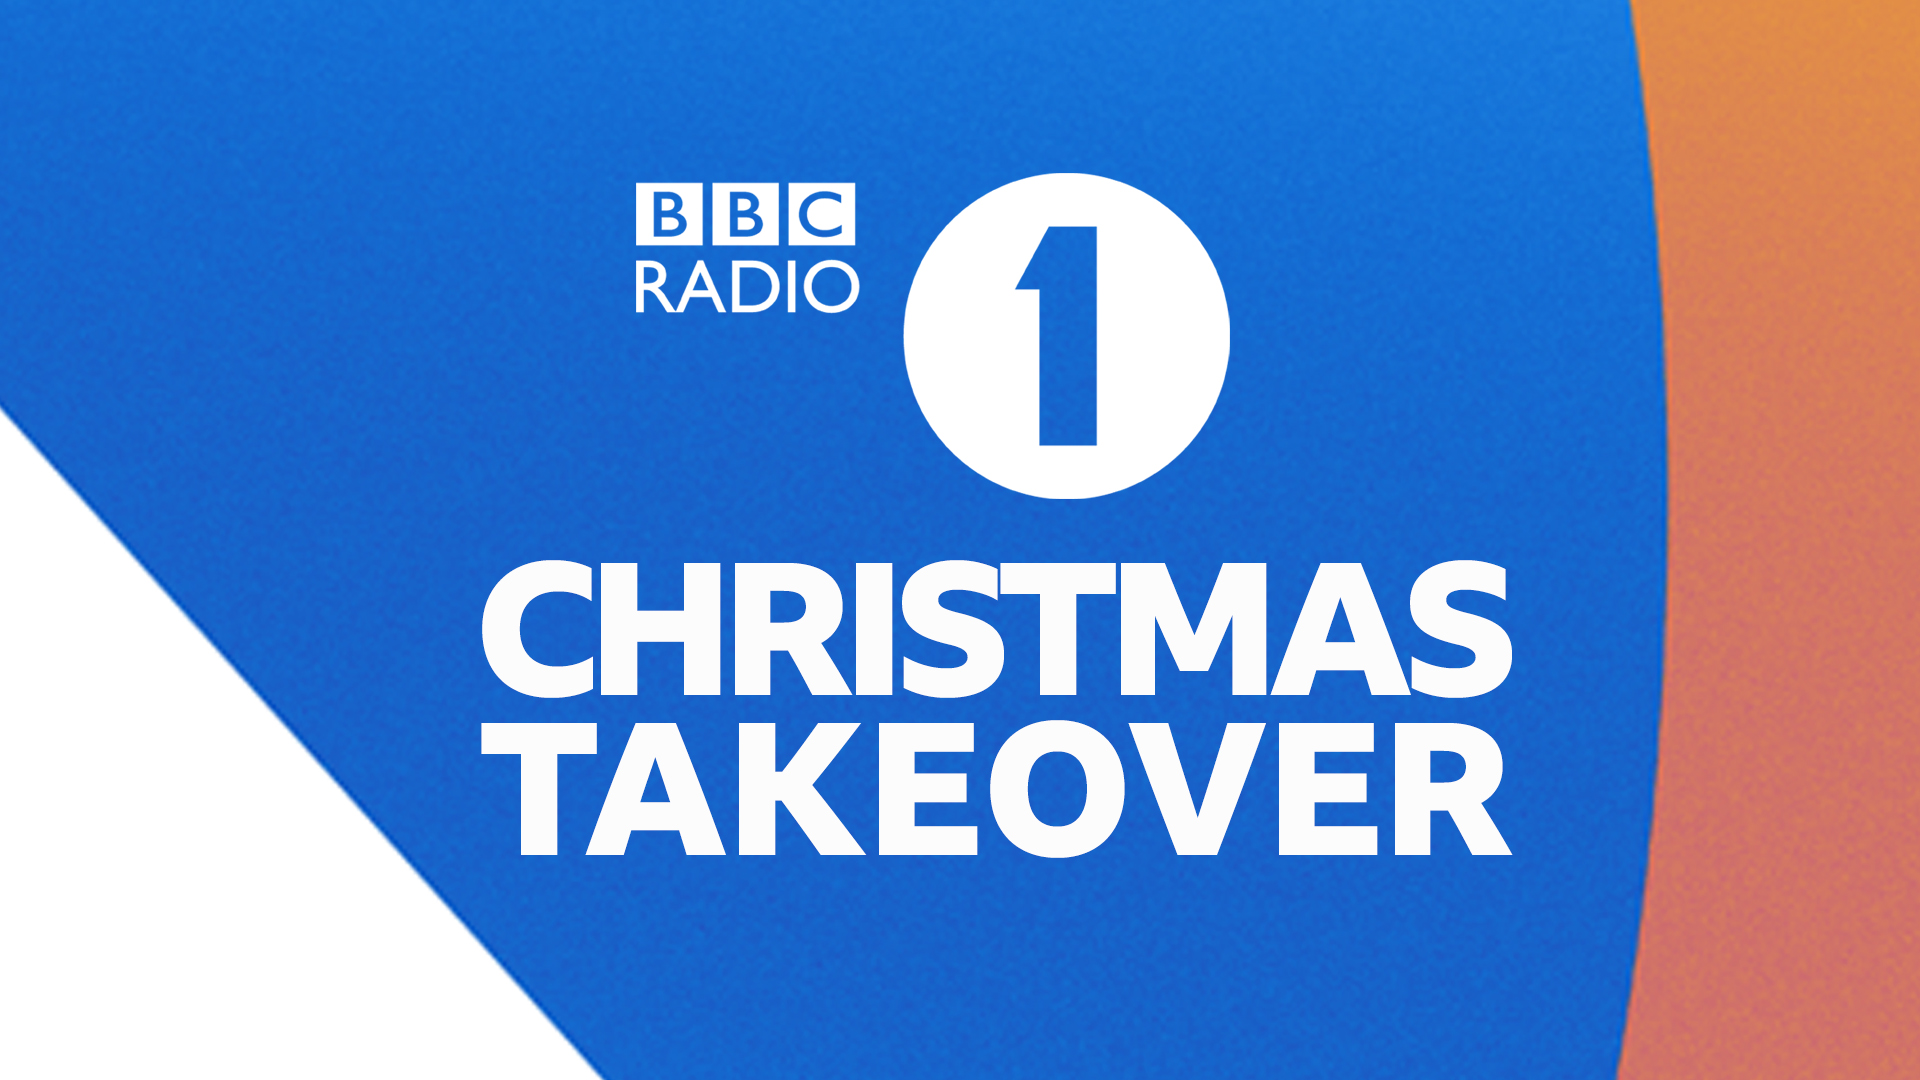 Radio 1's Up and Coming Presenter Takeover